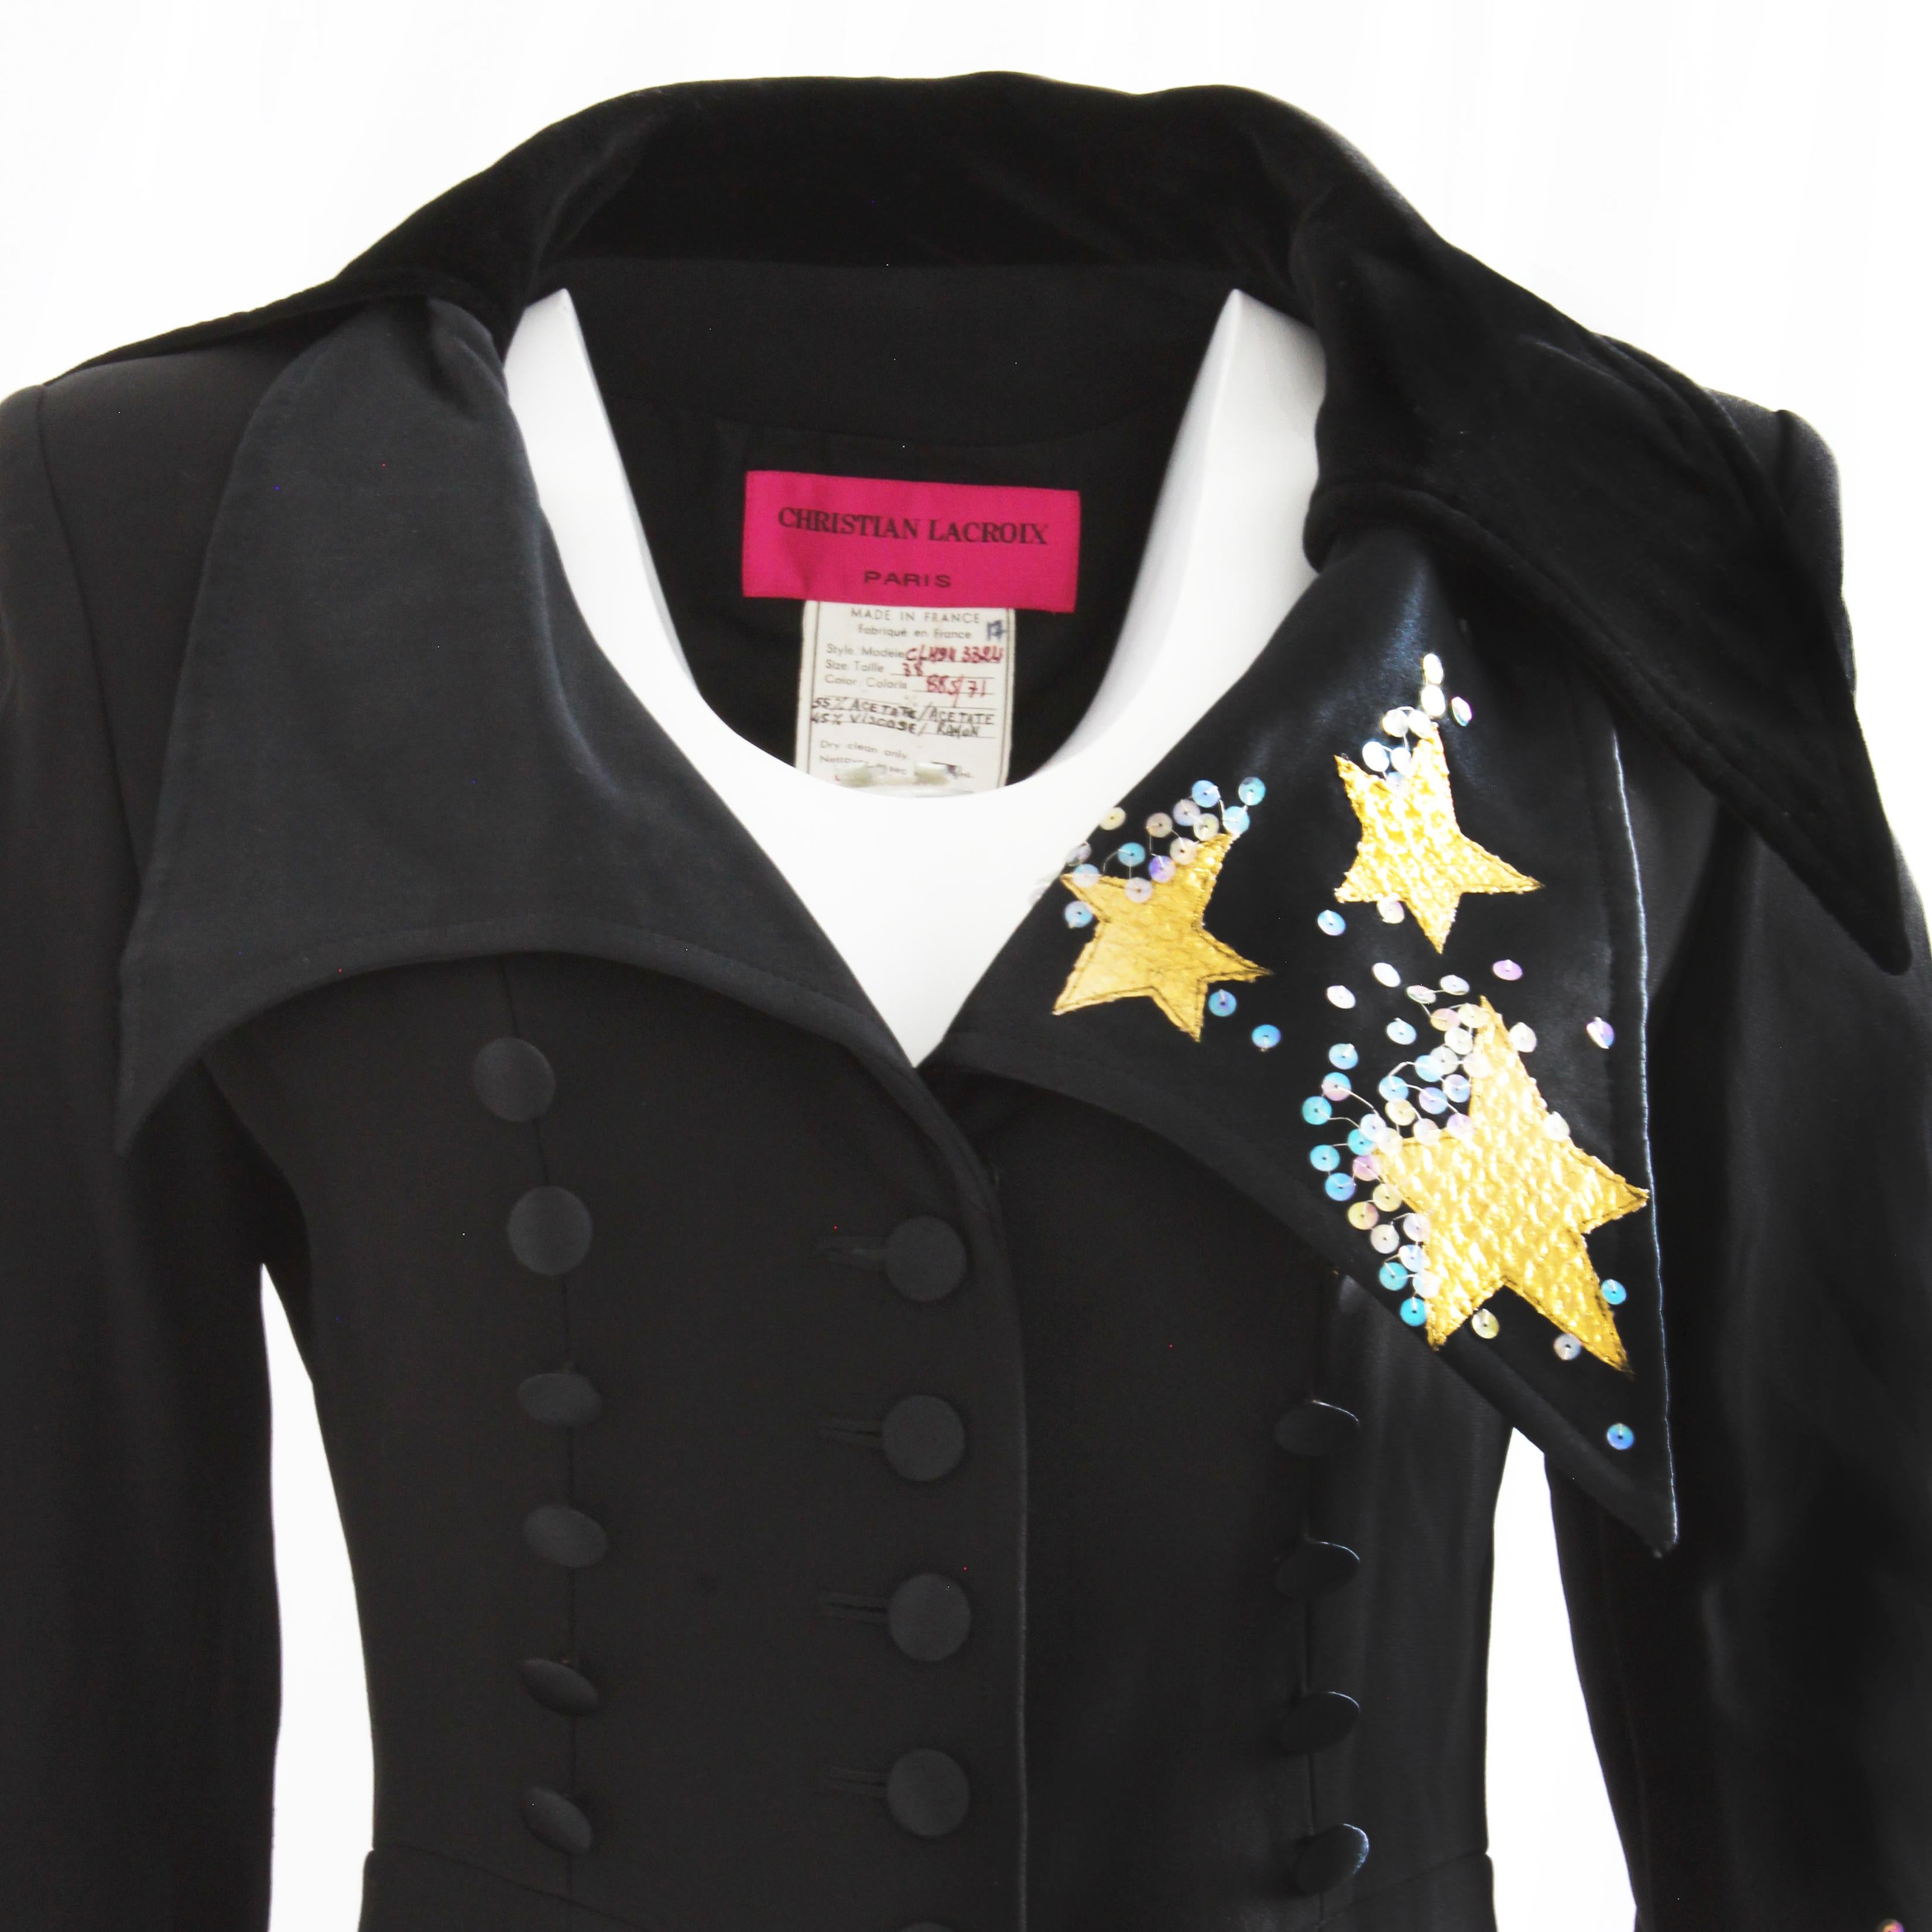 Christian Lacroix Jacket Stars and Sequins Black Structured Gabardine Velvet 90s In Good Condition For Sale In Port Saint Lucie, FL